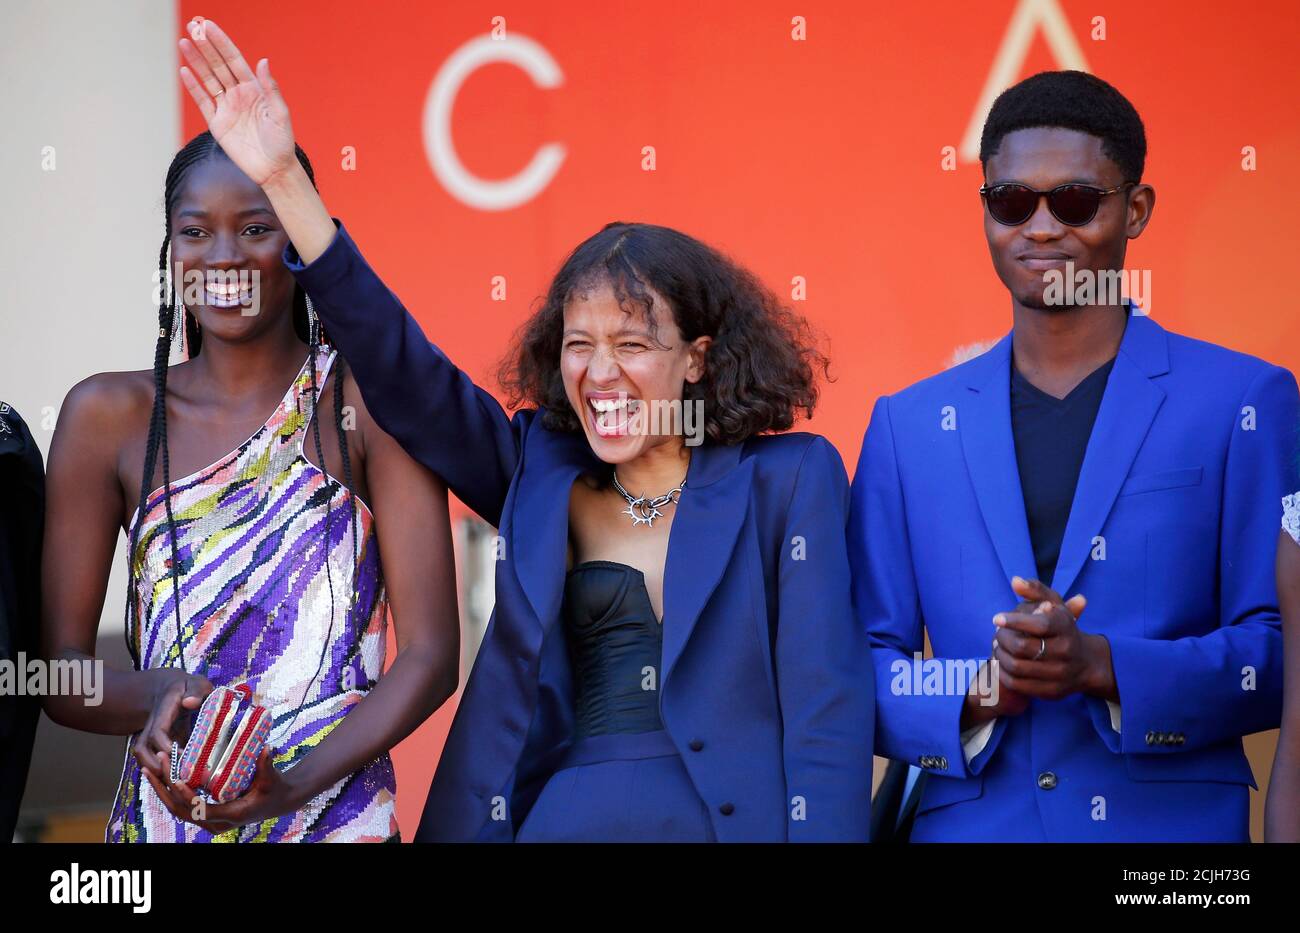 72nd Cannes Film Festival - Screening of the film "Atlantics" (Atlantique)  in competition - Red Carpet Arrivals - Cannes, France, May 16, 2019.  Director Mati Diop and cast members pose. REUTERS/Stephane Mahe Stock Photo  - Alamy